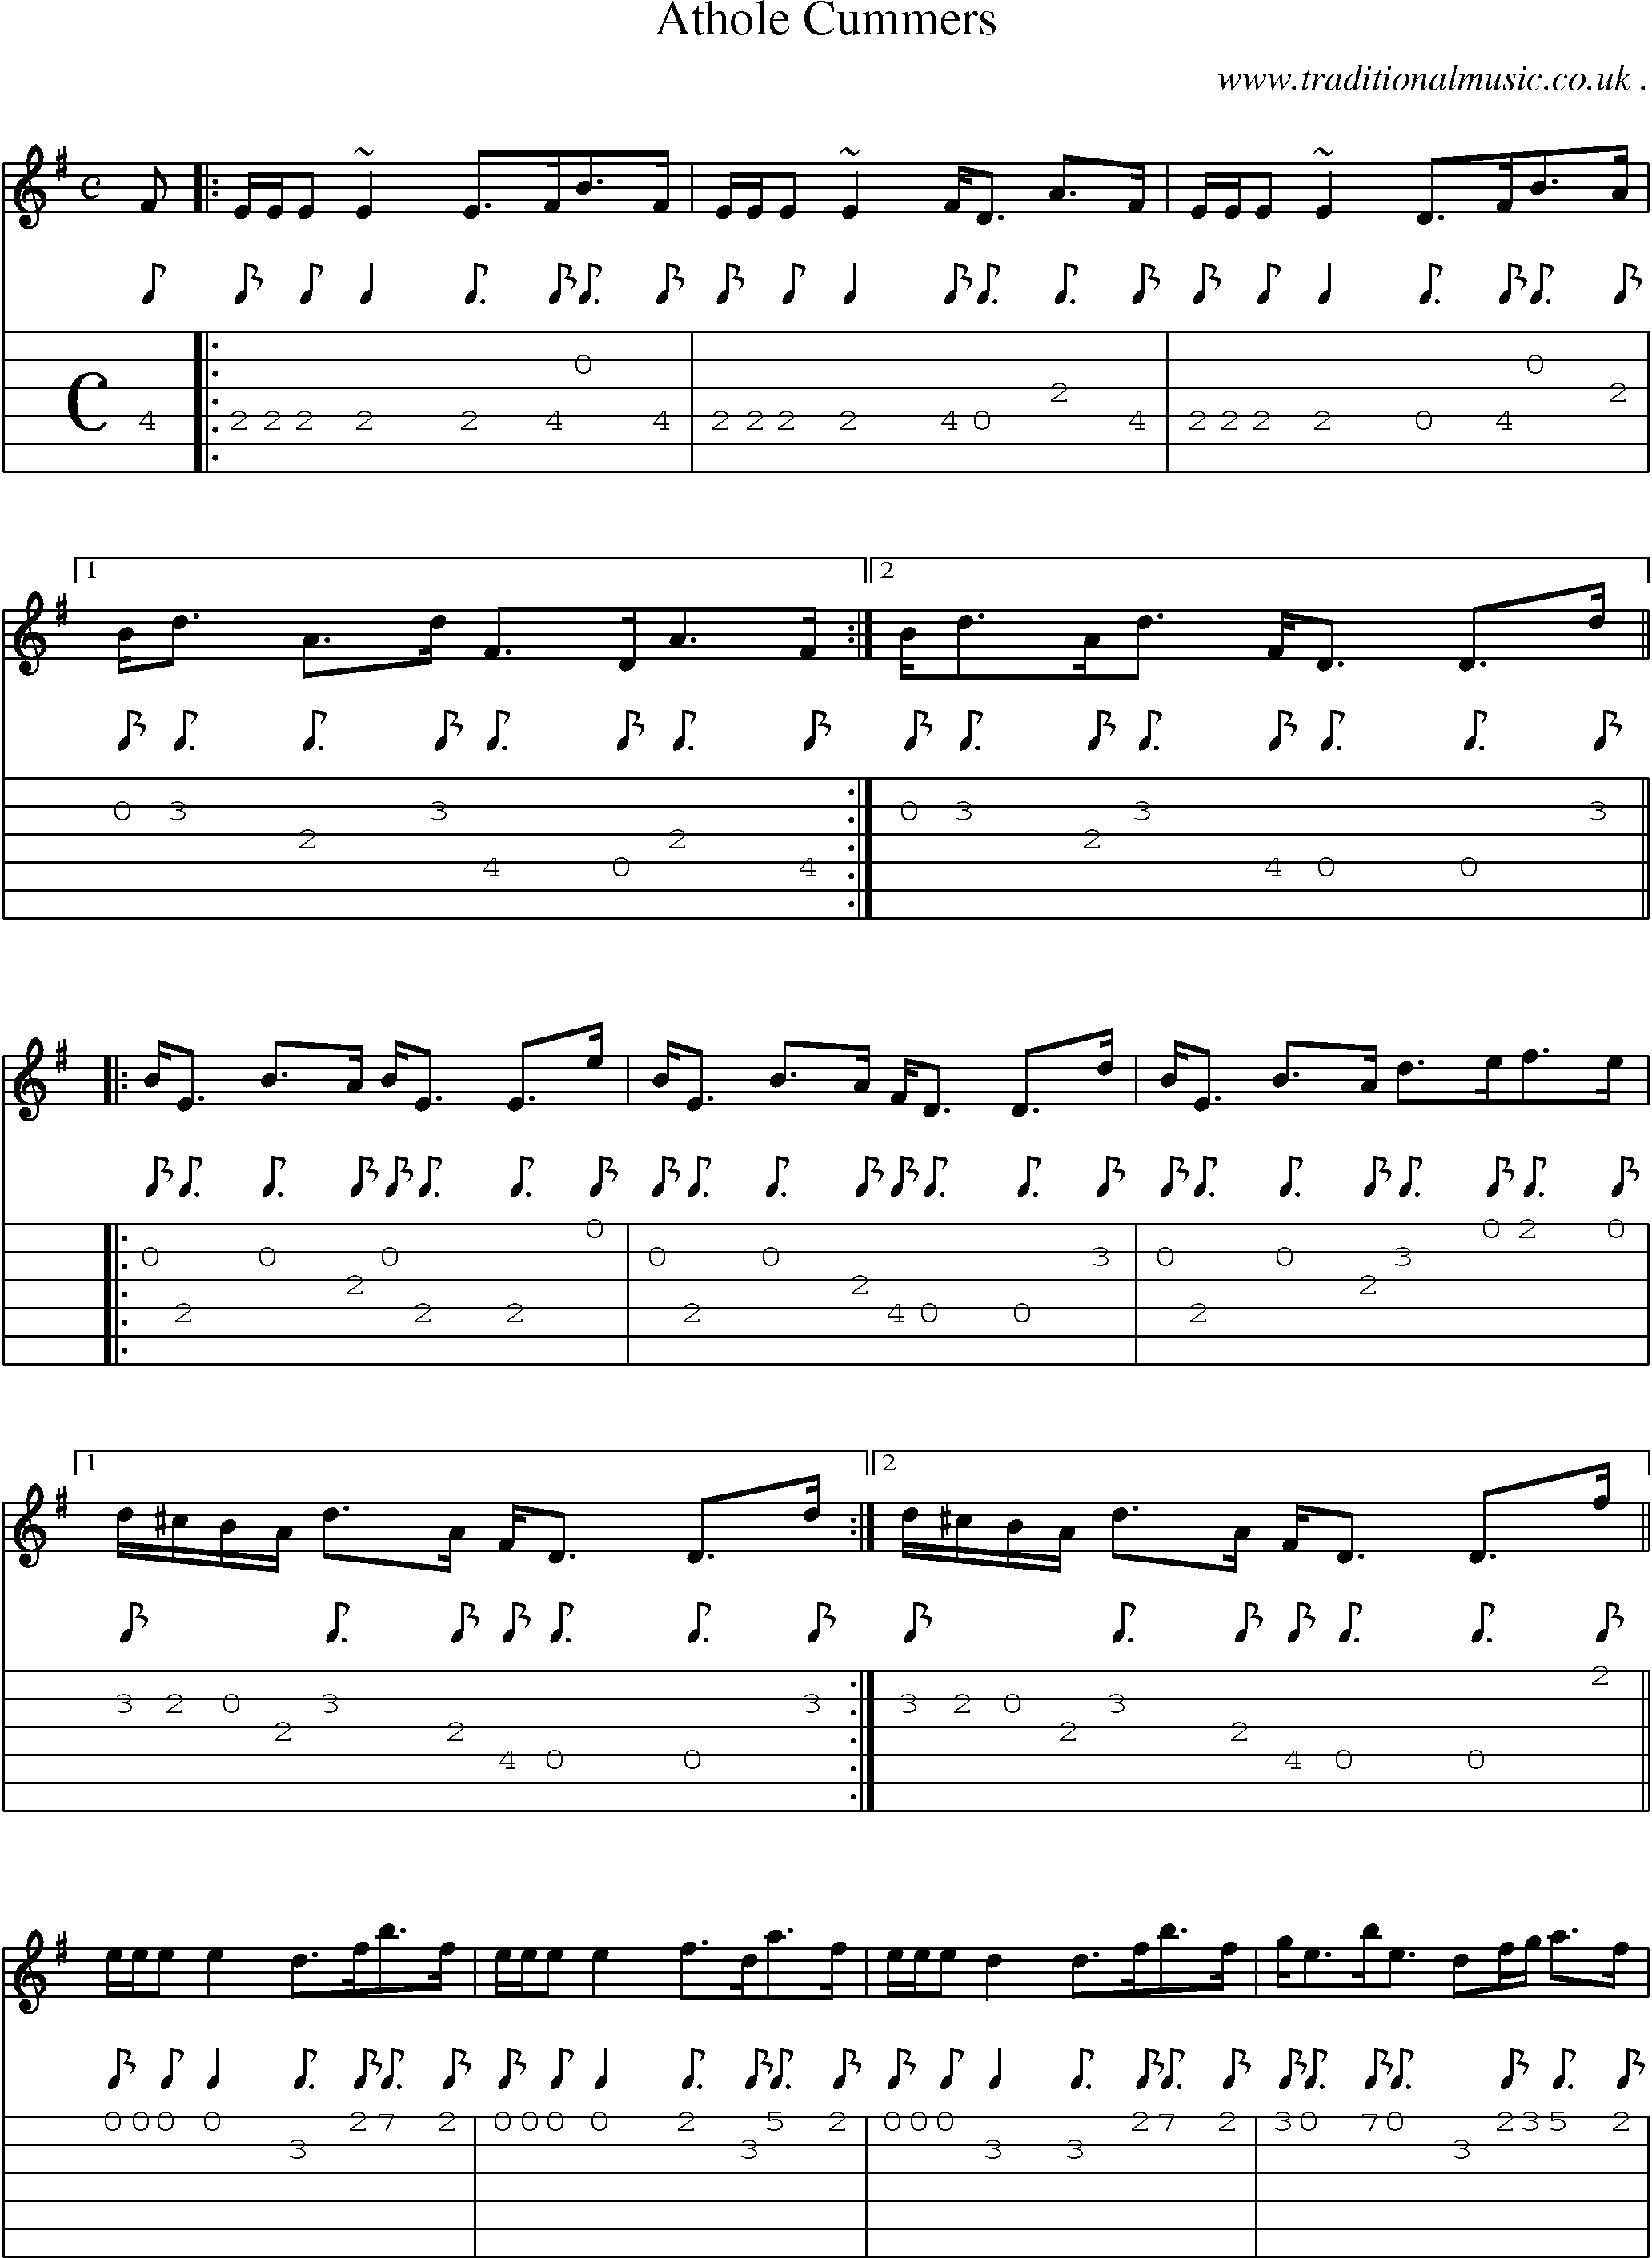 Sheet-music  score, Chords and Guitar Tabs for Athole Cummers